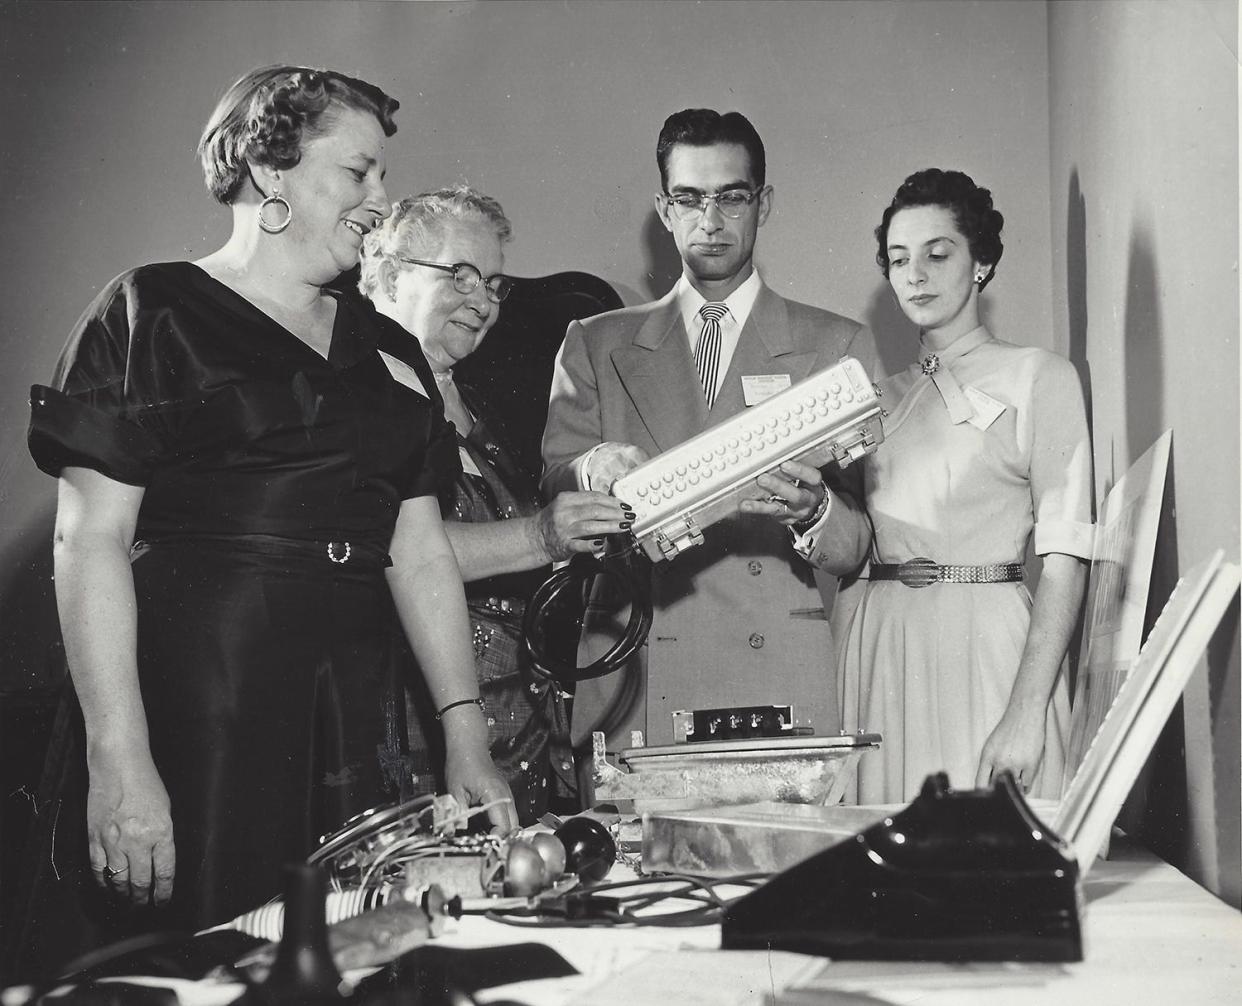 Looking over some of the new dial telephone equipment in 1956. (Left to right) Margaret Smith Cousino, Katie Smith, Norman Smith, and Betty (Chinavare) Smith.